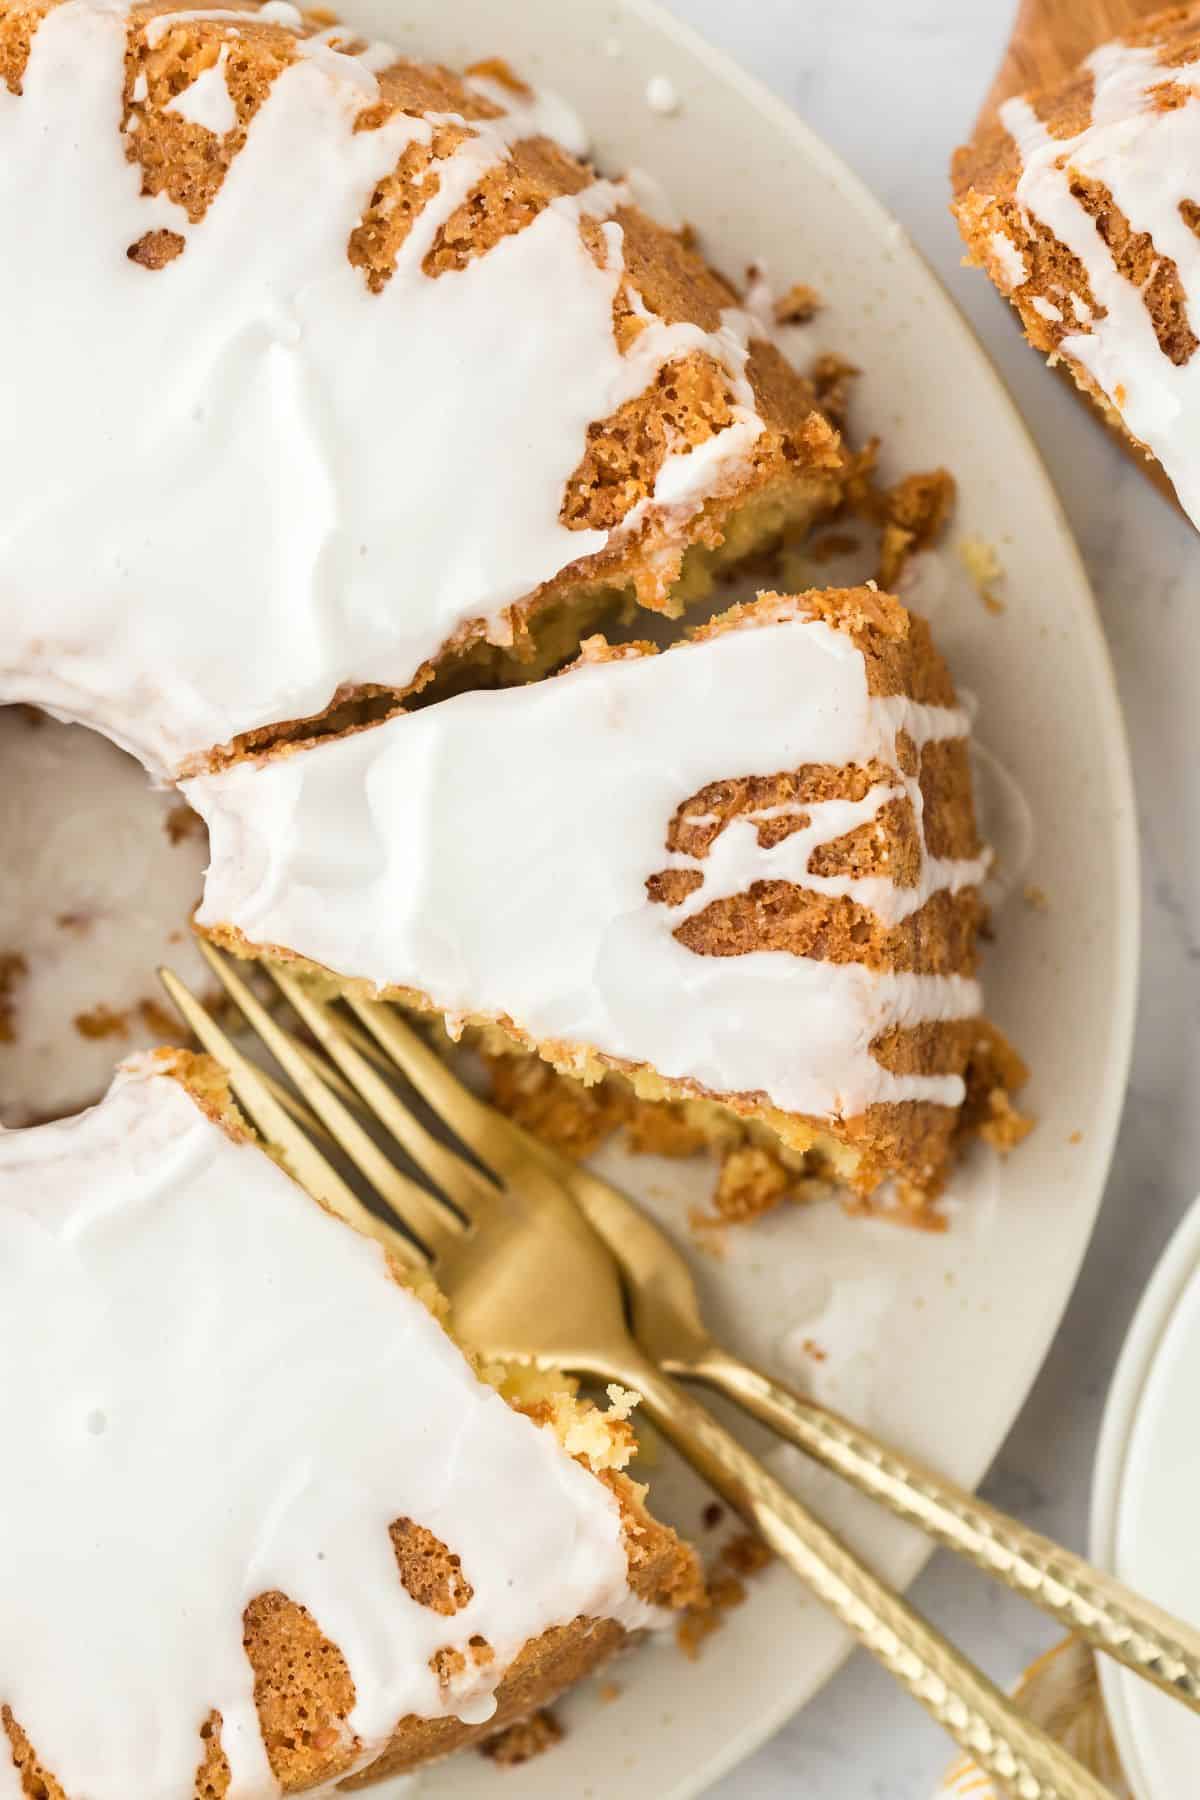 Overhead shot of Louisiana Crunch Cake with white glaze, placed on a plate with a slice being taken out, with golden forks next to it